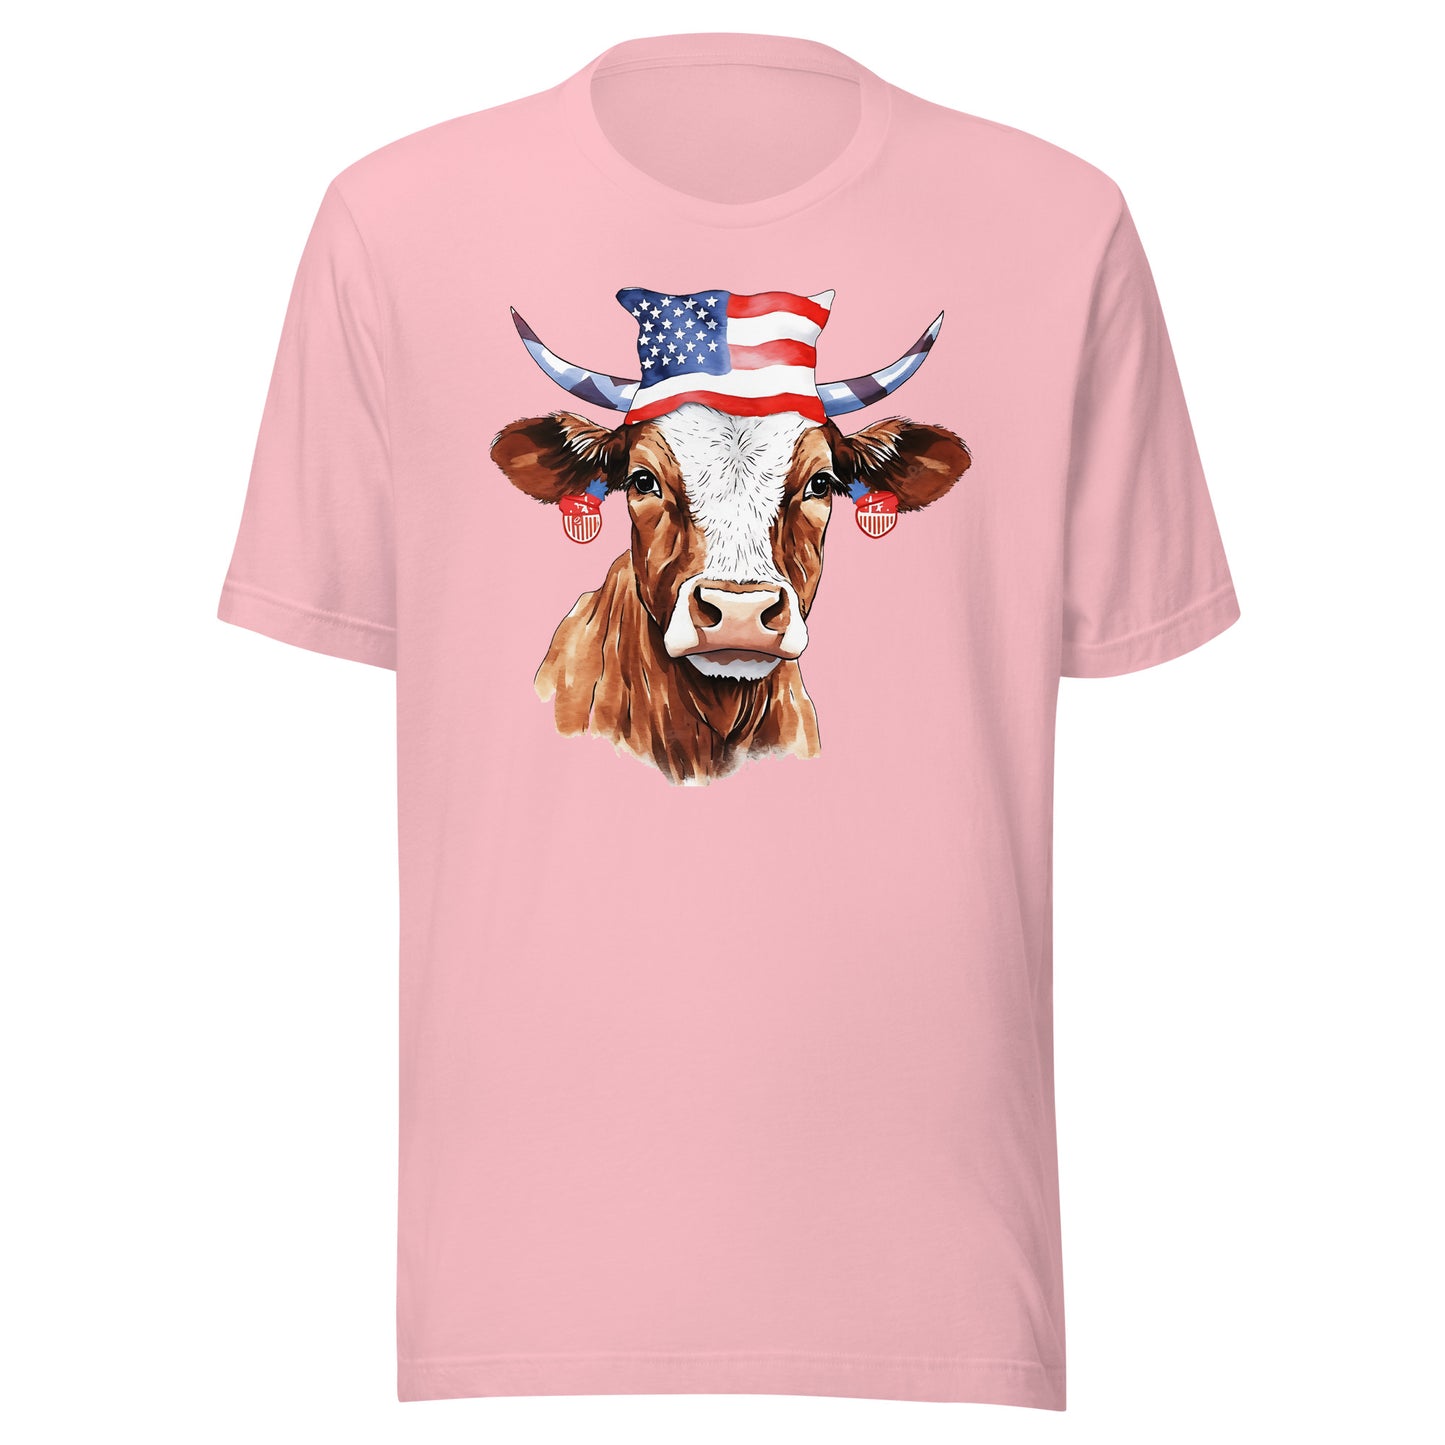 Patriotic Cow Tshirt For Cow Lovers Pink Color